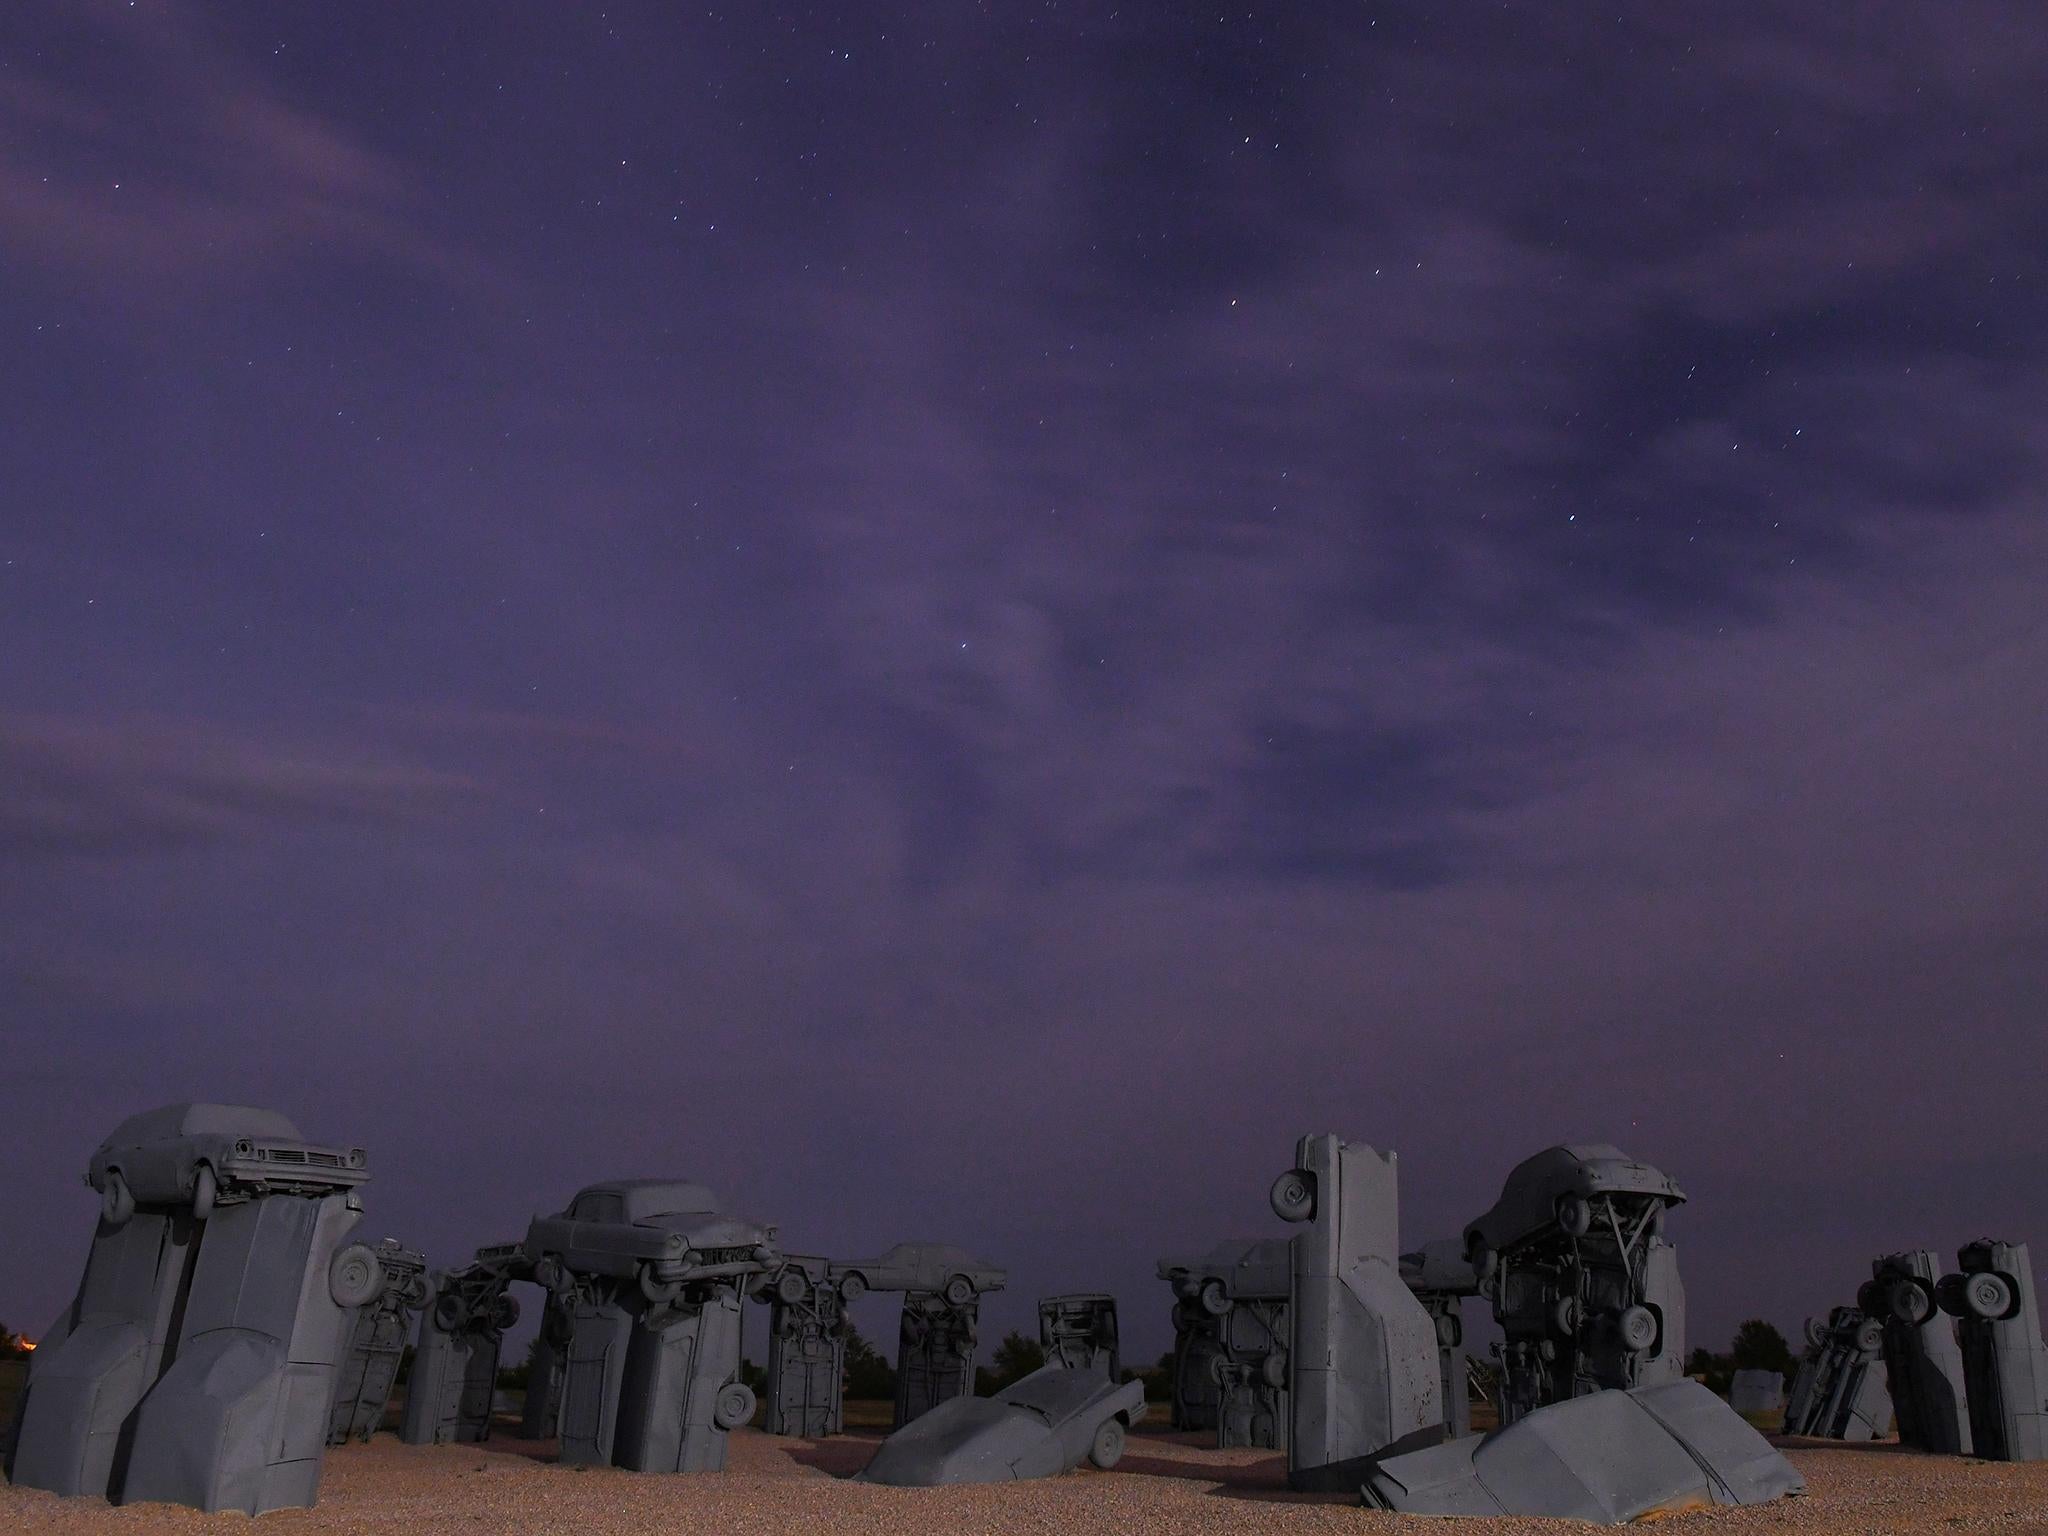 The eccentric ‘Carhenge’ makes for a cosmic eclipse-watching spot